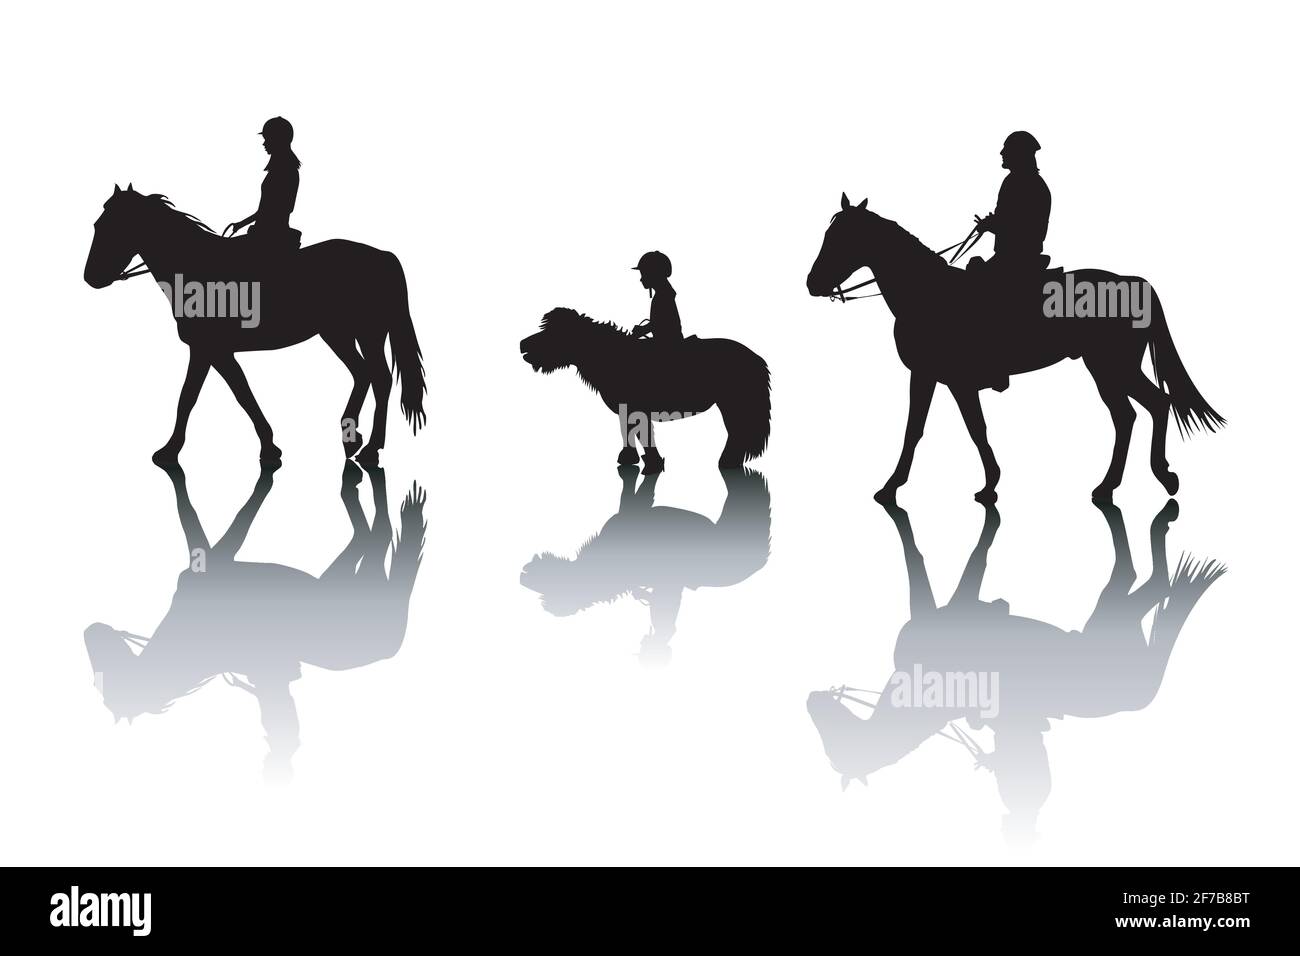 Family silhouettes riding horses and pony Stock Vector